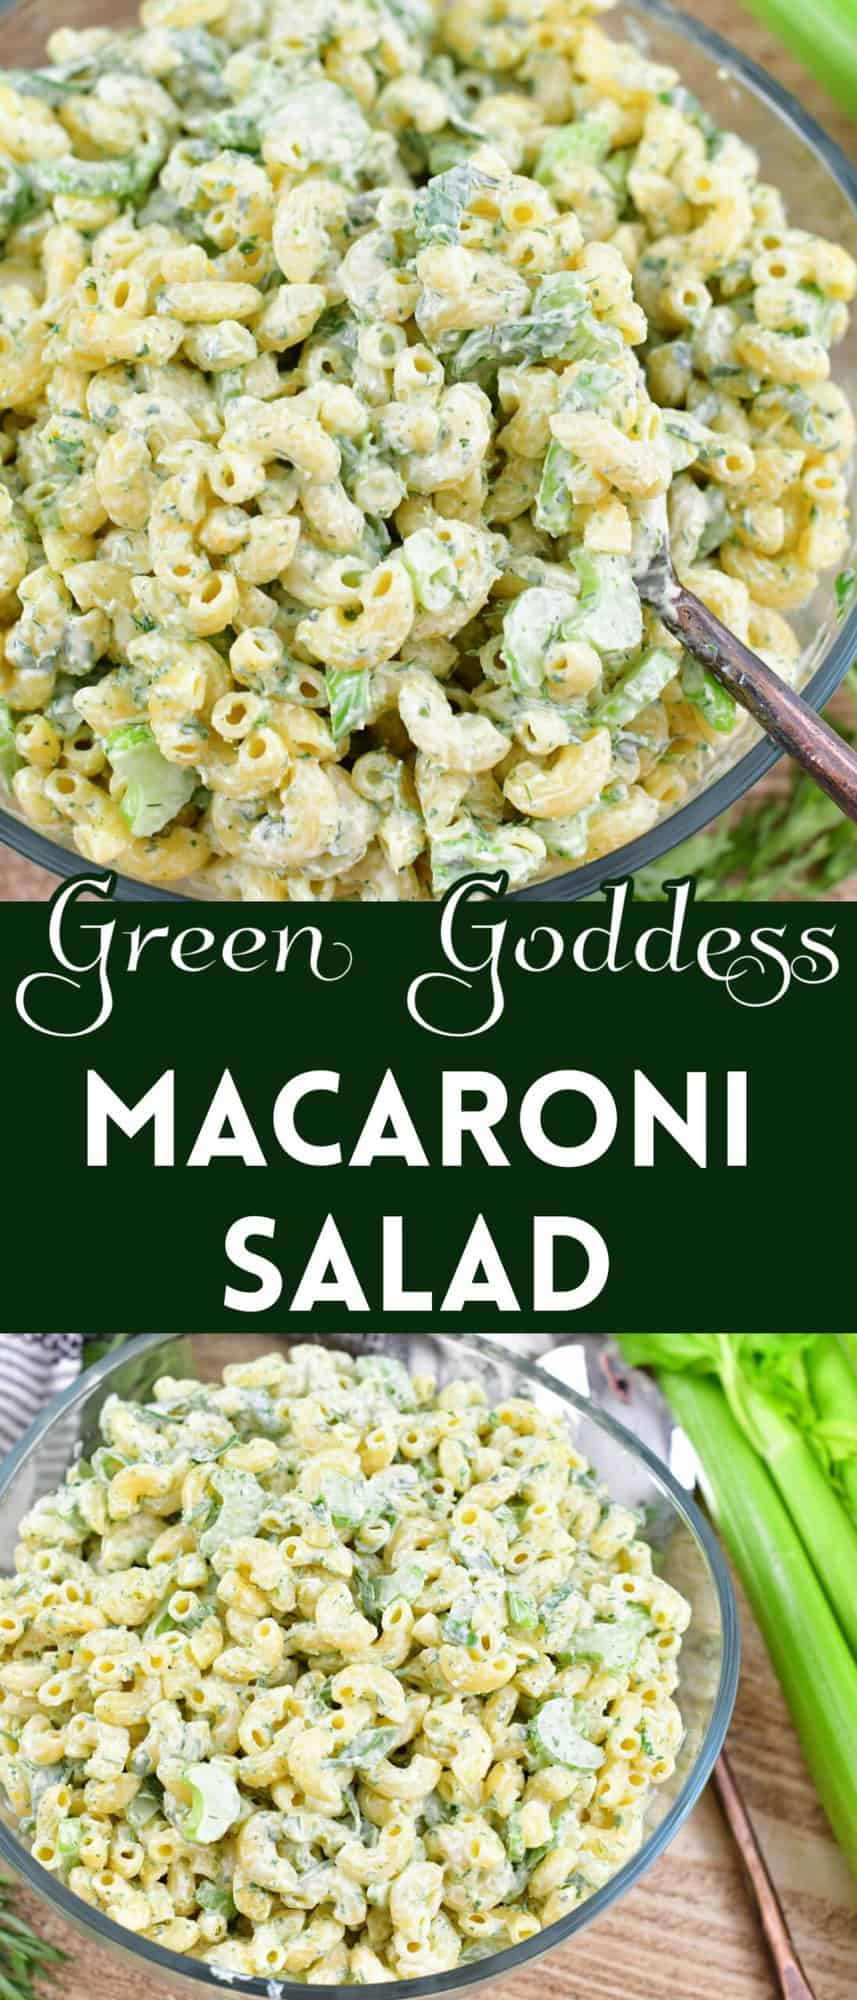 collage of two closeup images of macaroni salad and title